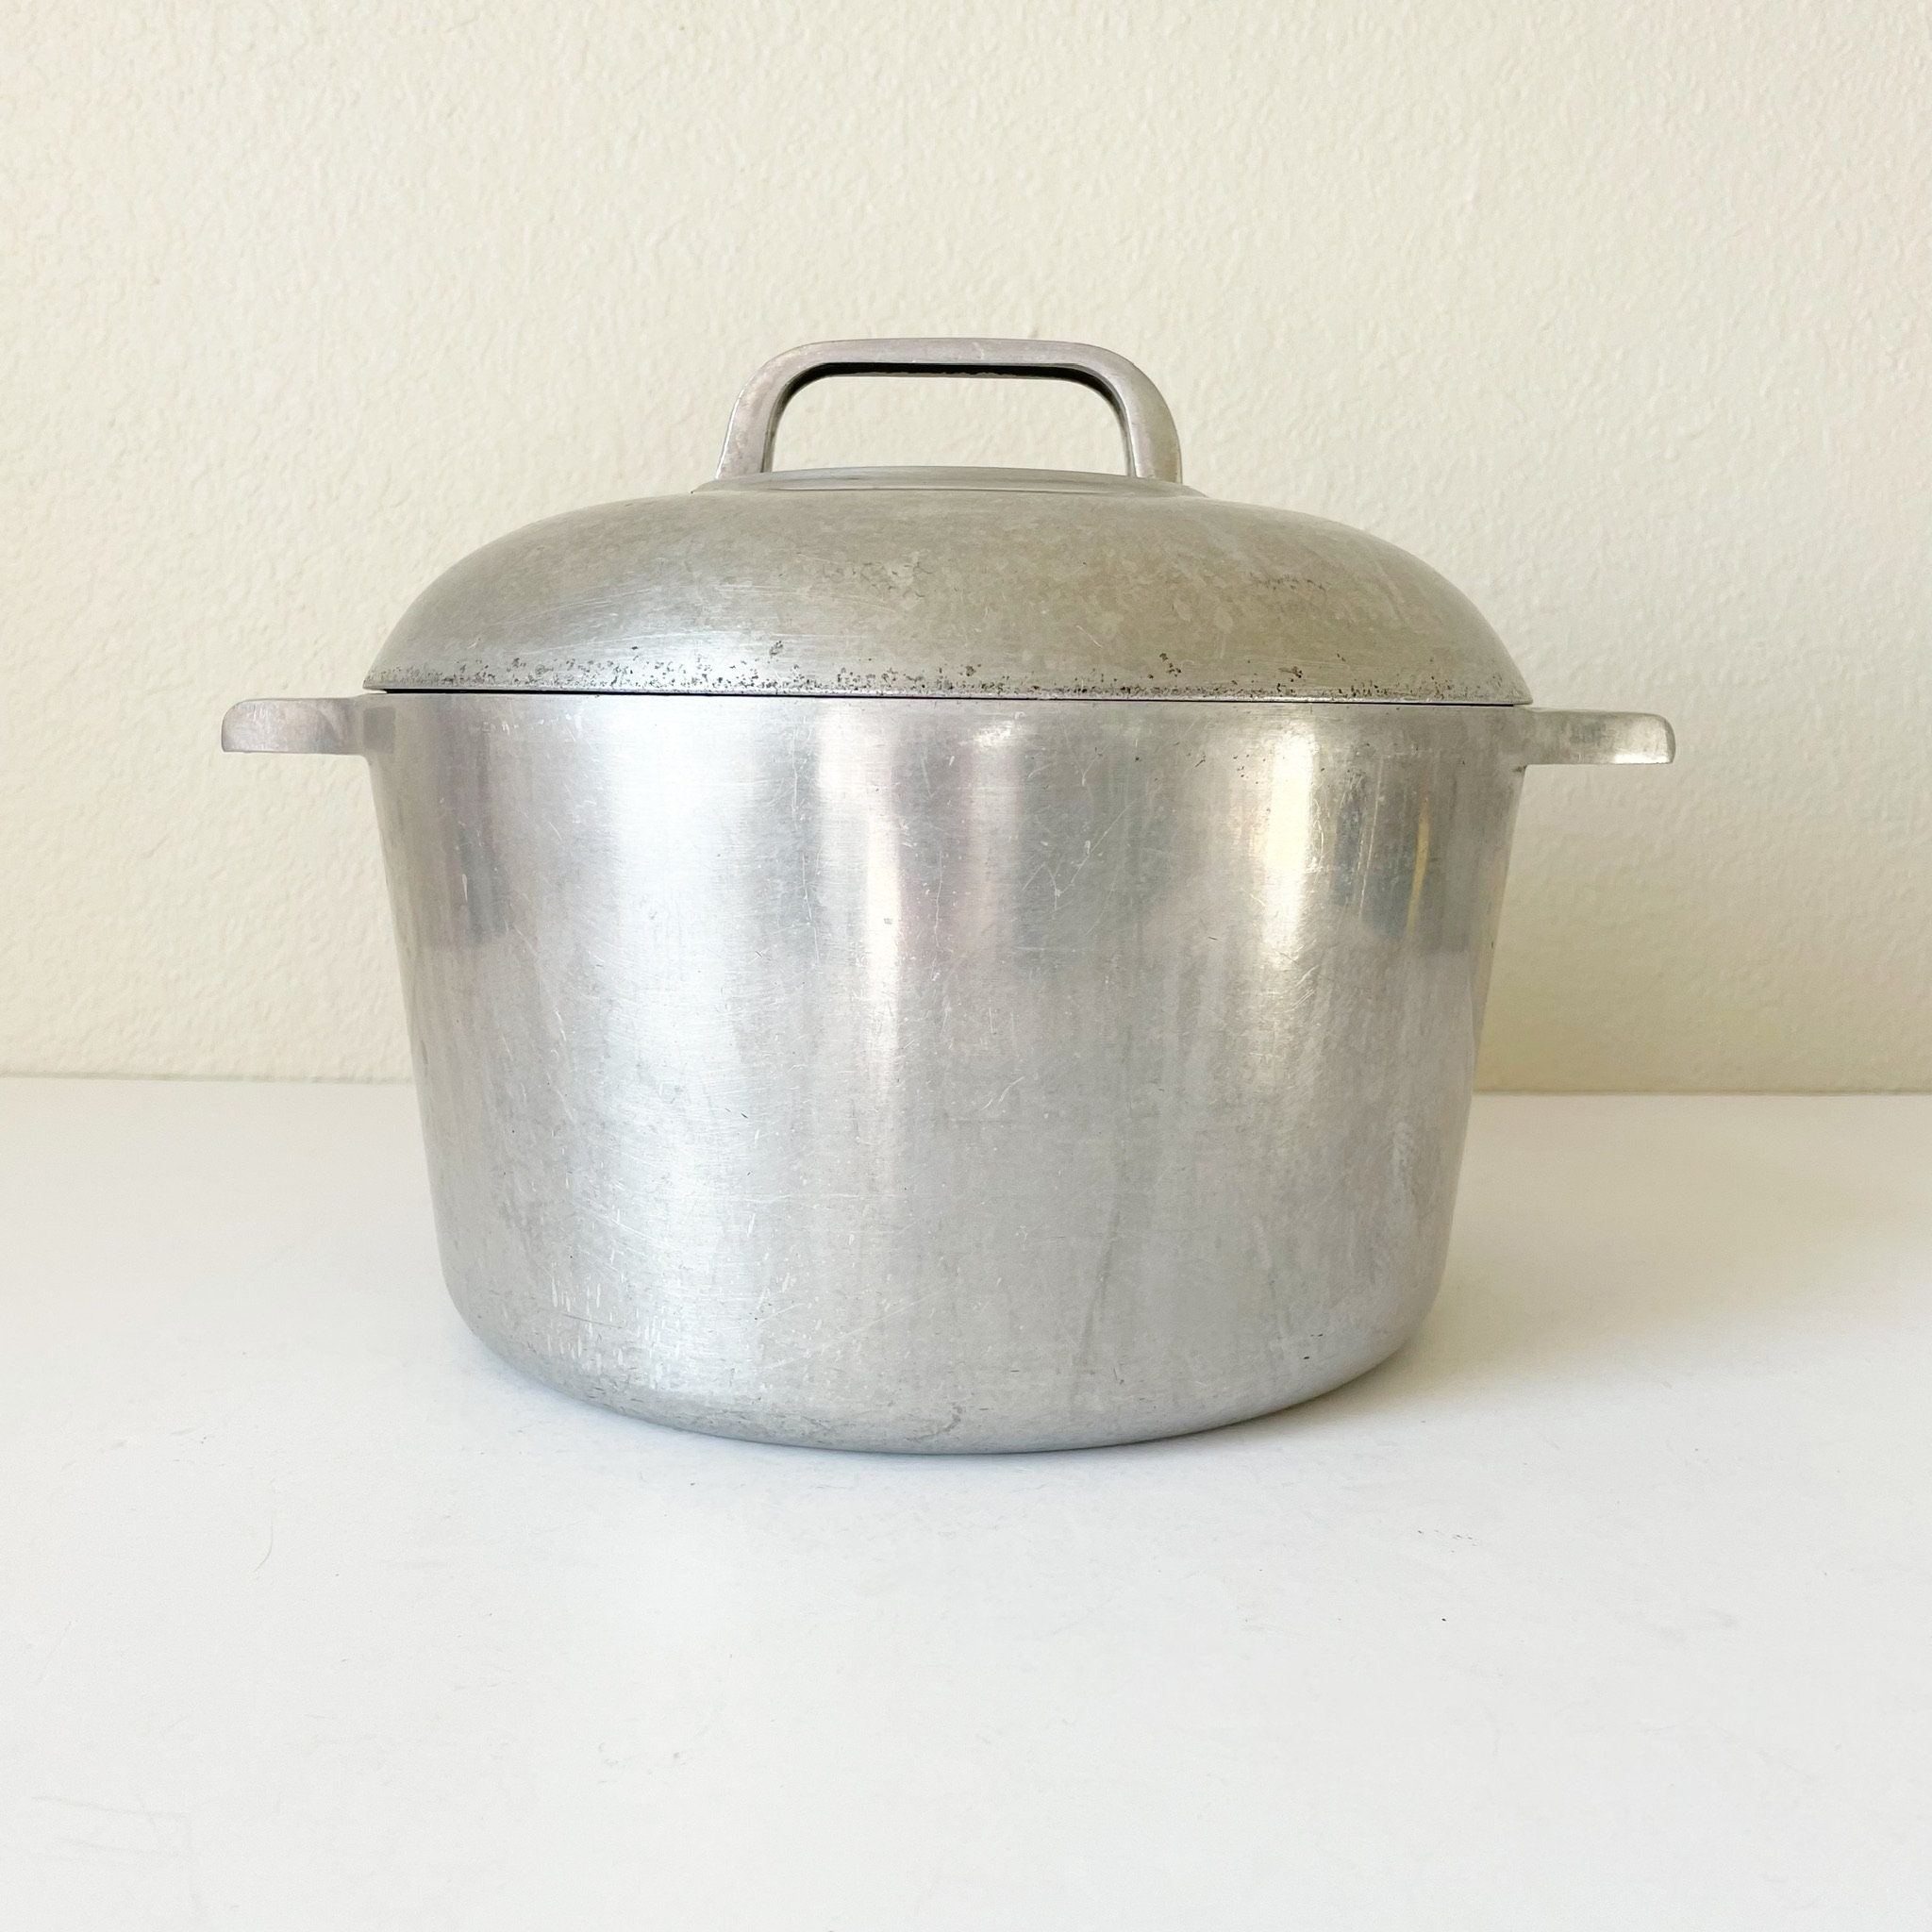 Lot 43 - Magnalite Cookware - Sac Valley Auctions